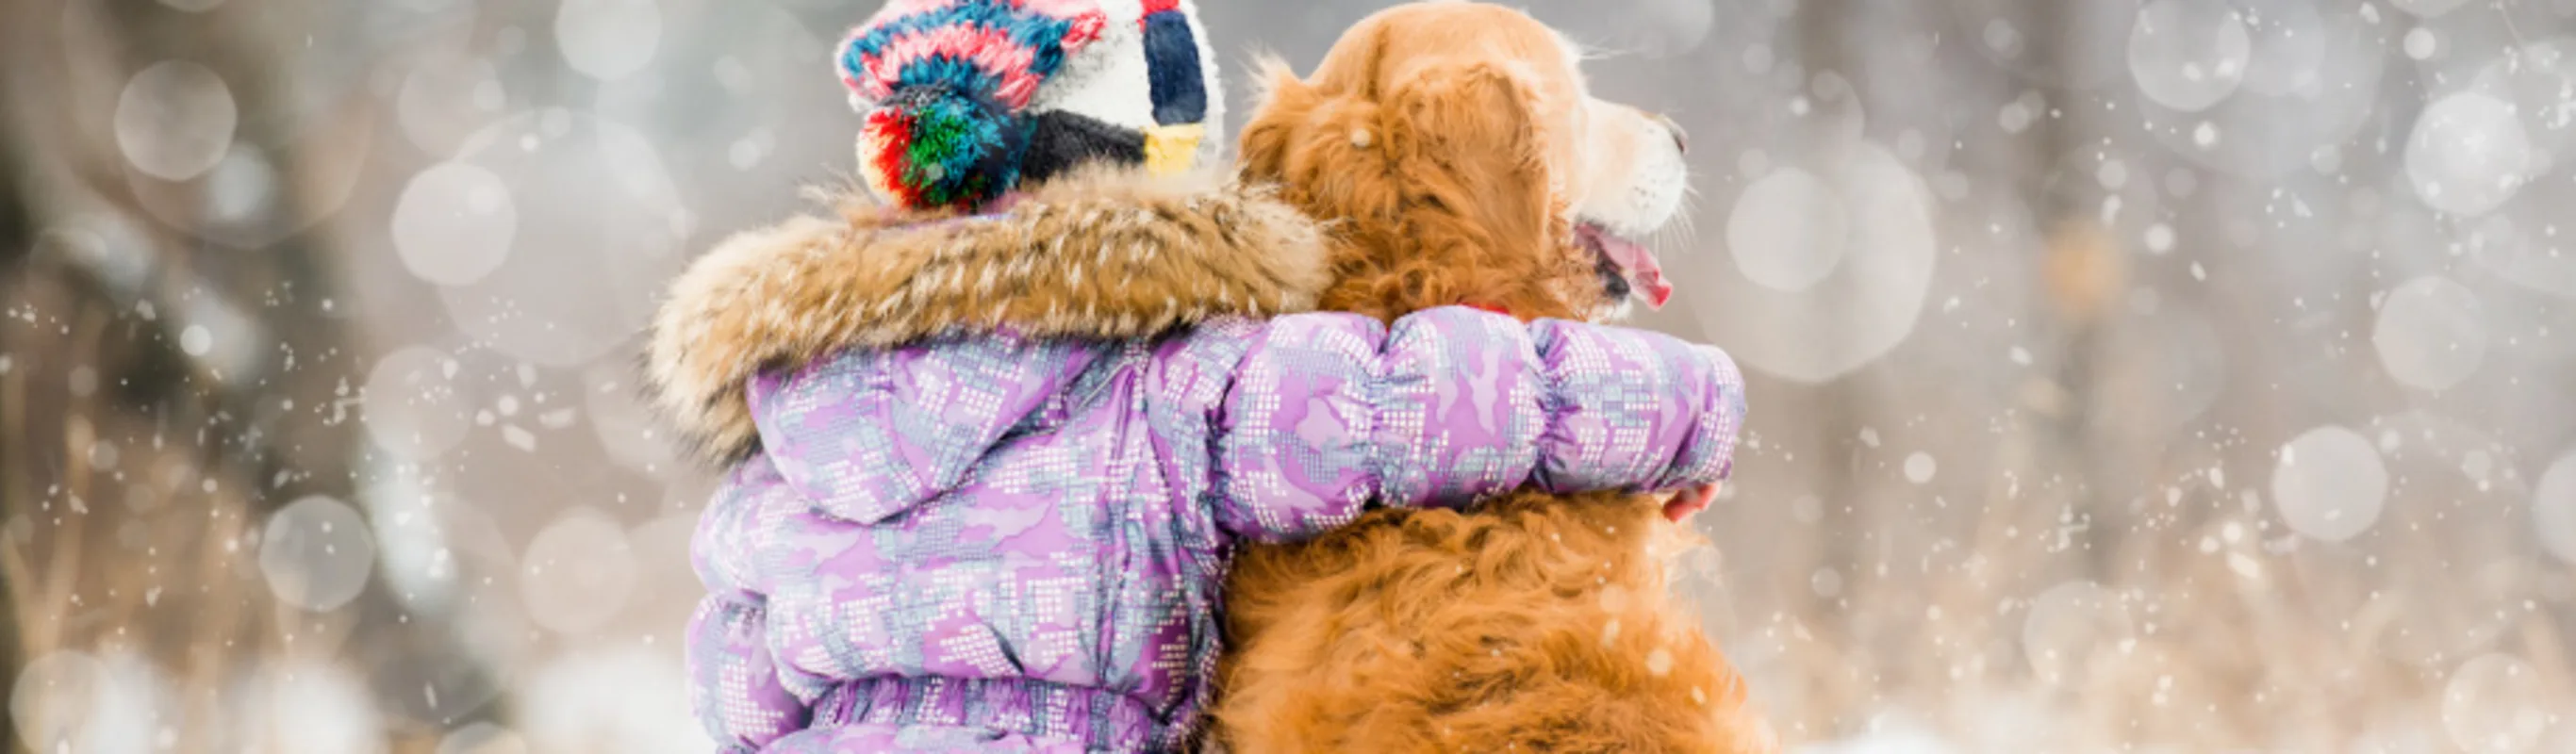 Golden retriever dog sitting outside in a snowy setting with little girl in puffy jacket